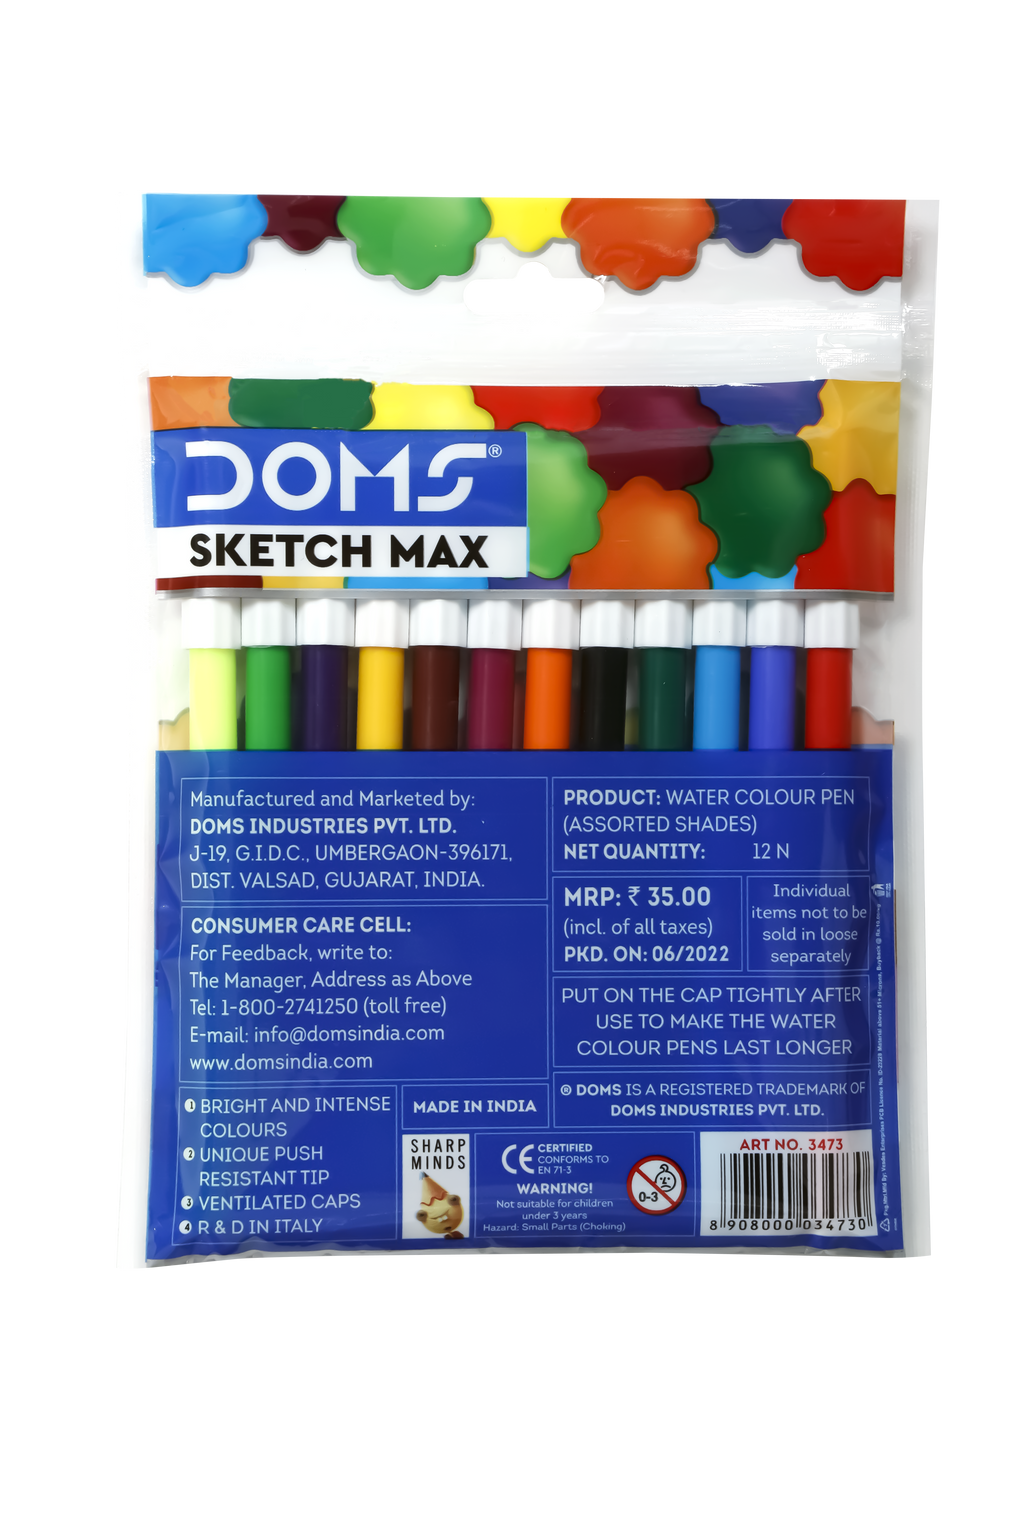 Buy DOMS Sketch Max NonToxic Jumbo Sketch Pen Set with Plastic Carry Case  12 Assorted Shades x 2 Set  Globally